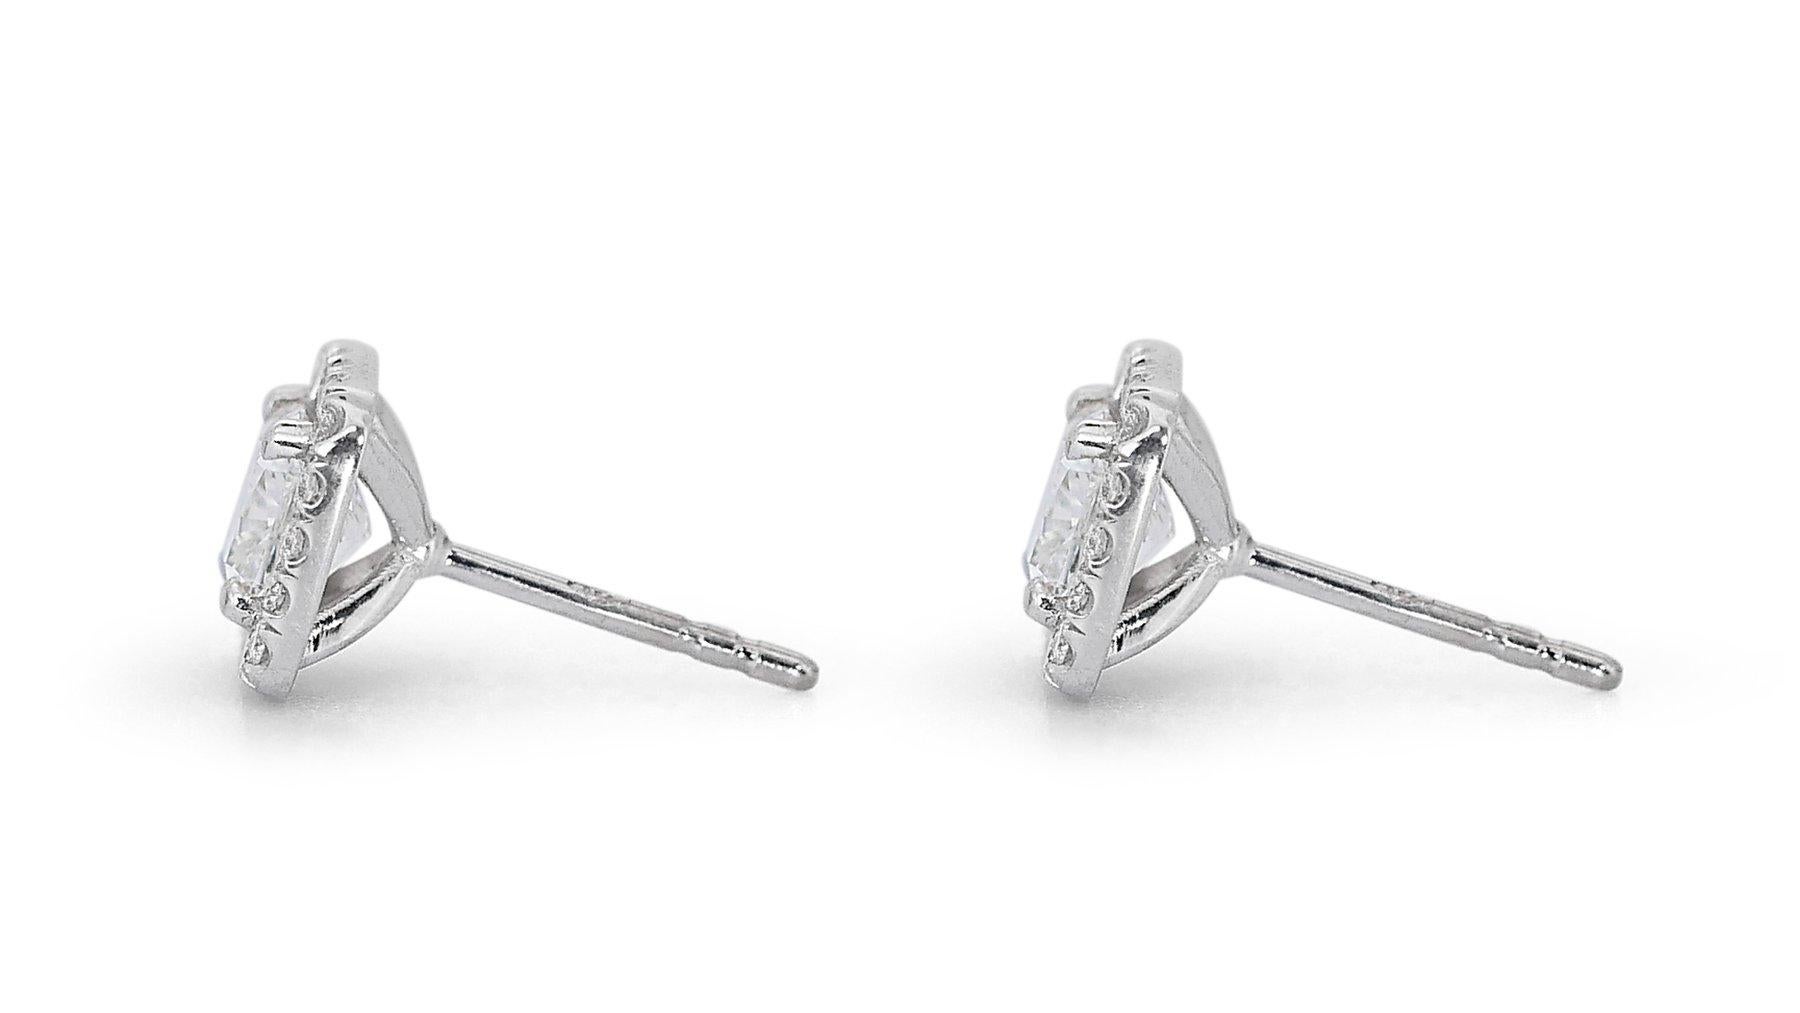 Stunning 2.33ct Diamond Halo Stud Earrings in 18k White Gold - GIA Certified

Elevate your elegance with these exquisite diamond halo earrings crafted from 18k white gold. The main stones are two captivating cushion-cut diamonds with a total carat